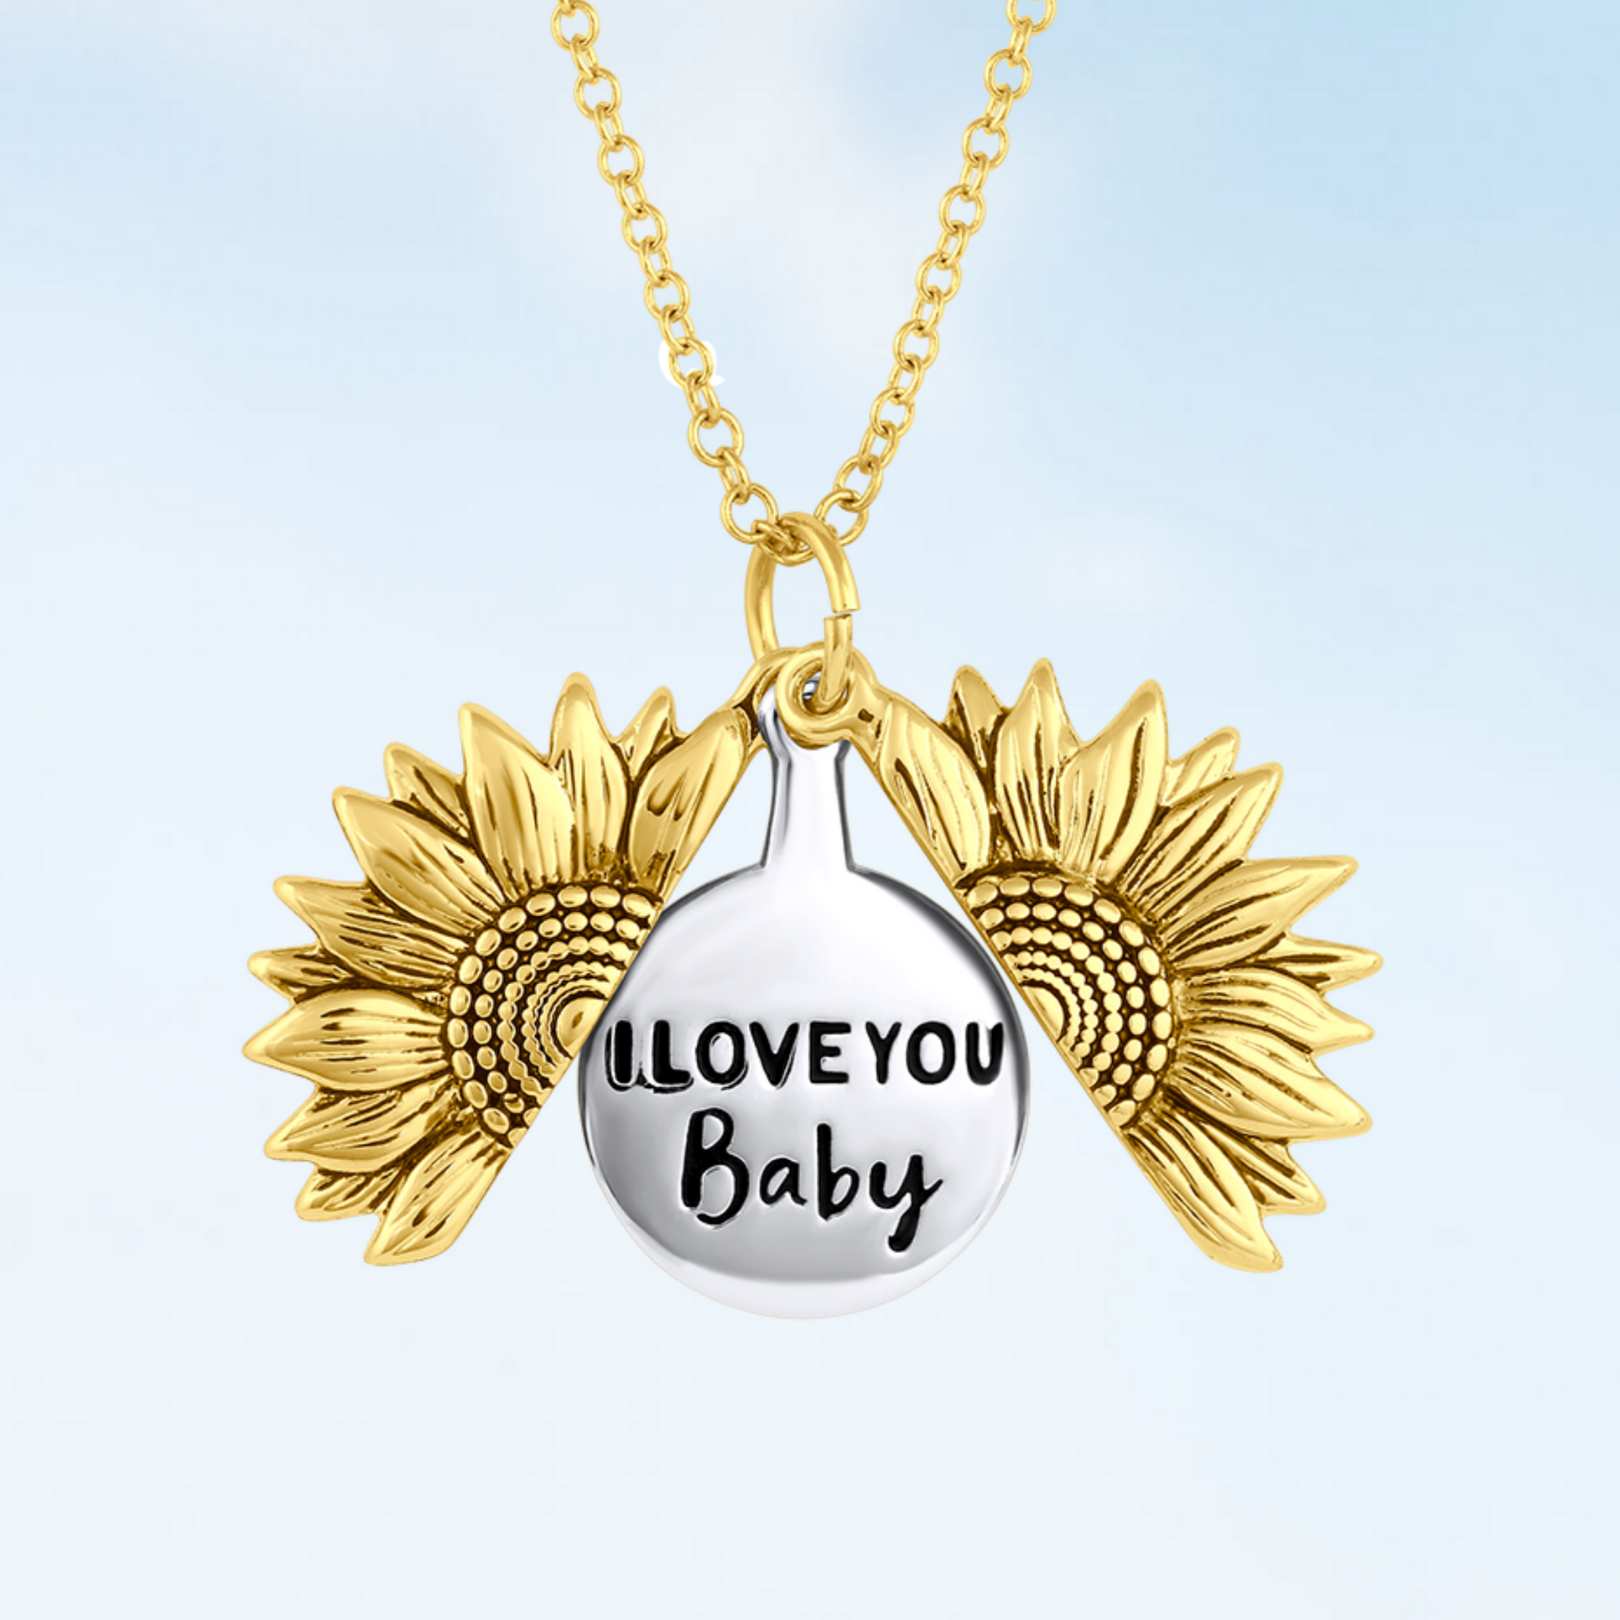 I love You Baby Necklace